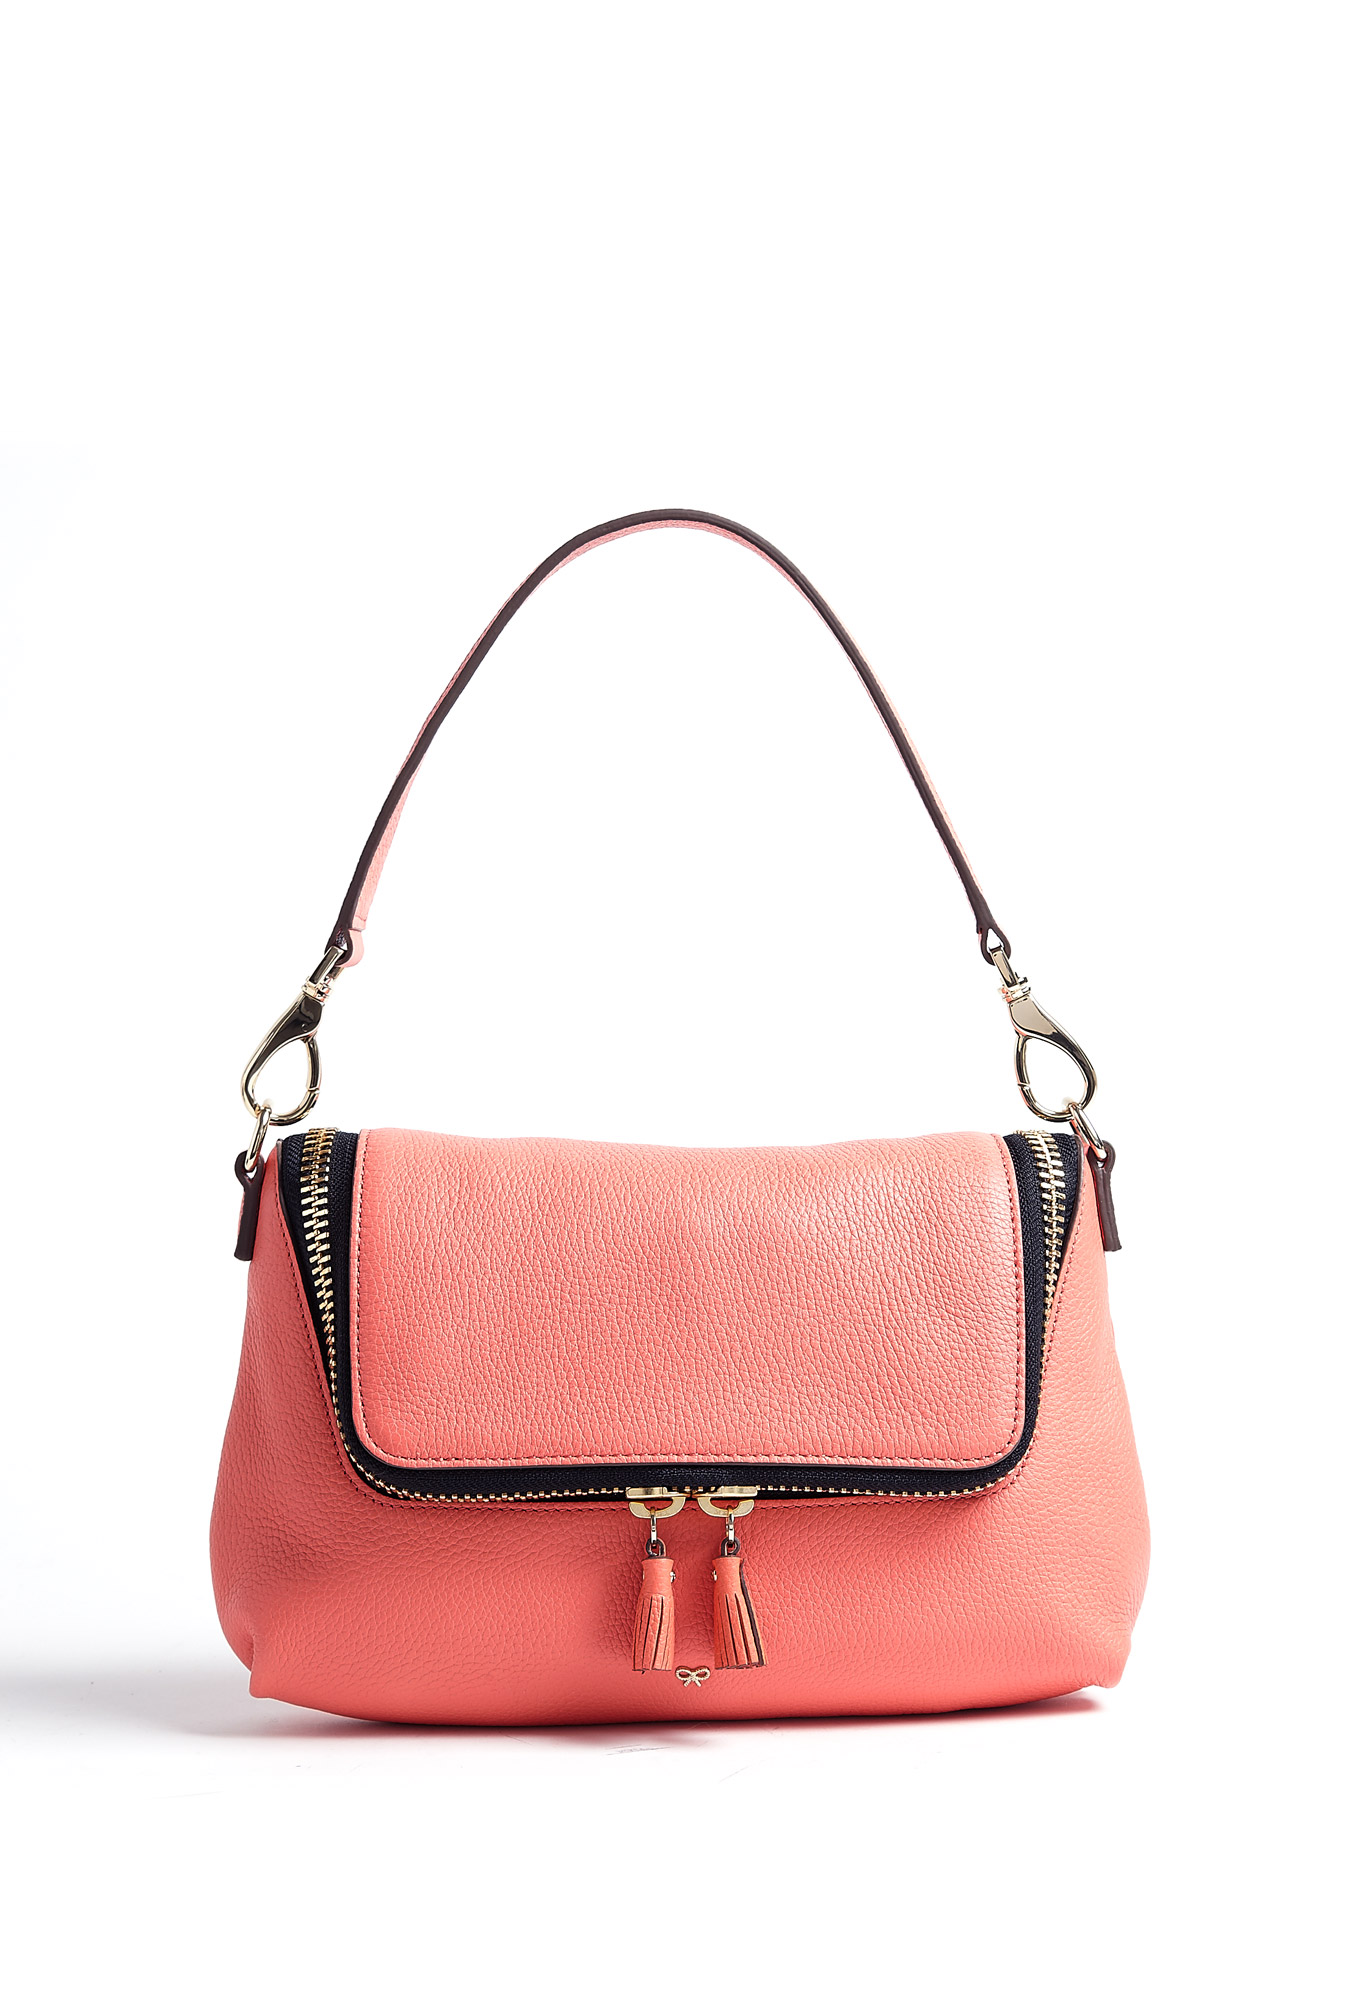 Anya Hindmarch Maxi Zip Cross Body Leather Shoulder Bag in Pink (coral) | Lyst